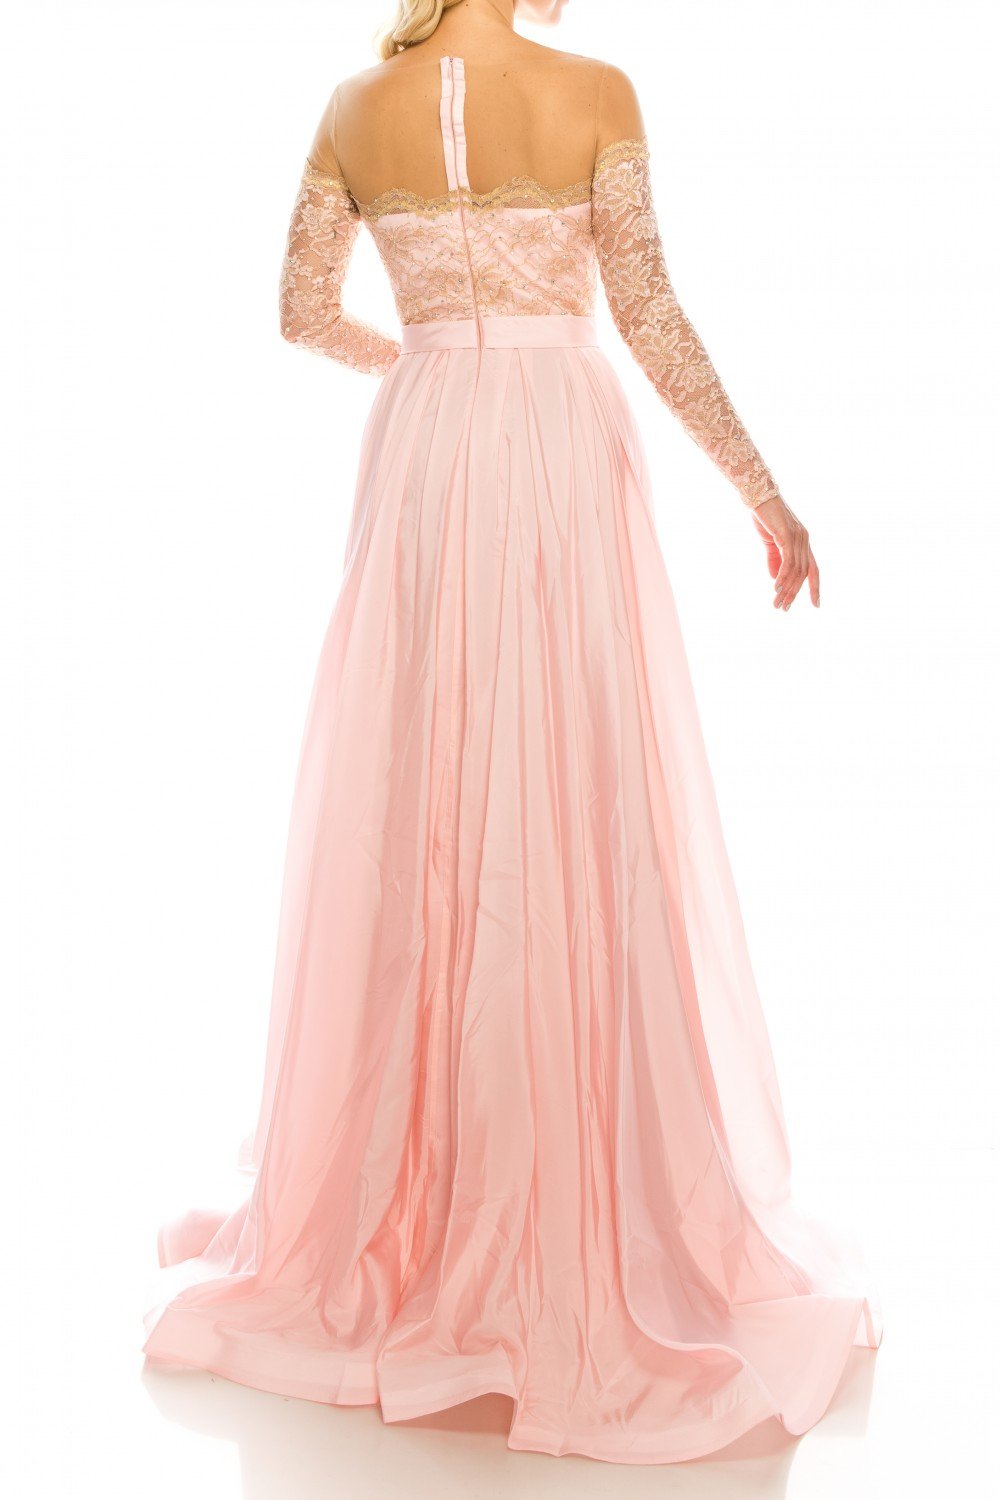 Odrella - 4514 Illusion Off Shoulder Long Sleeve A-Line Gown In Pink